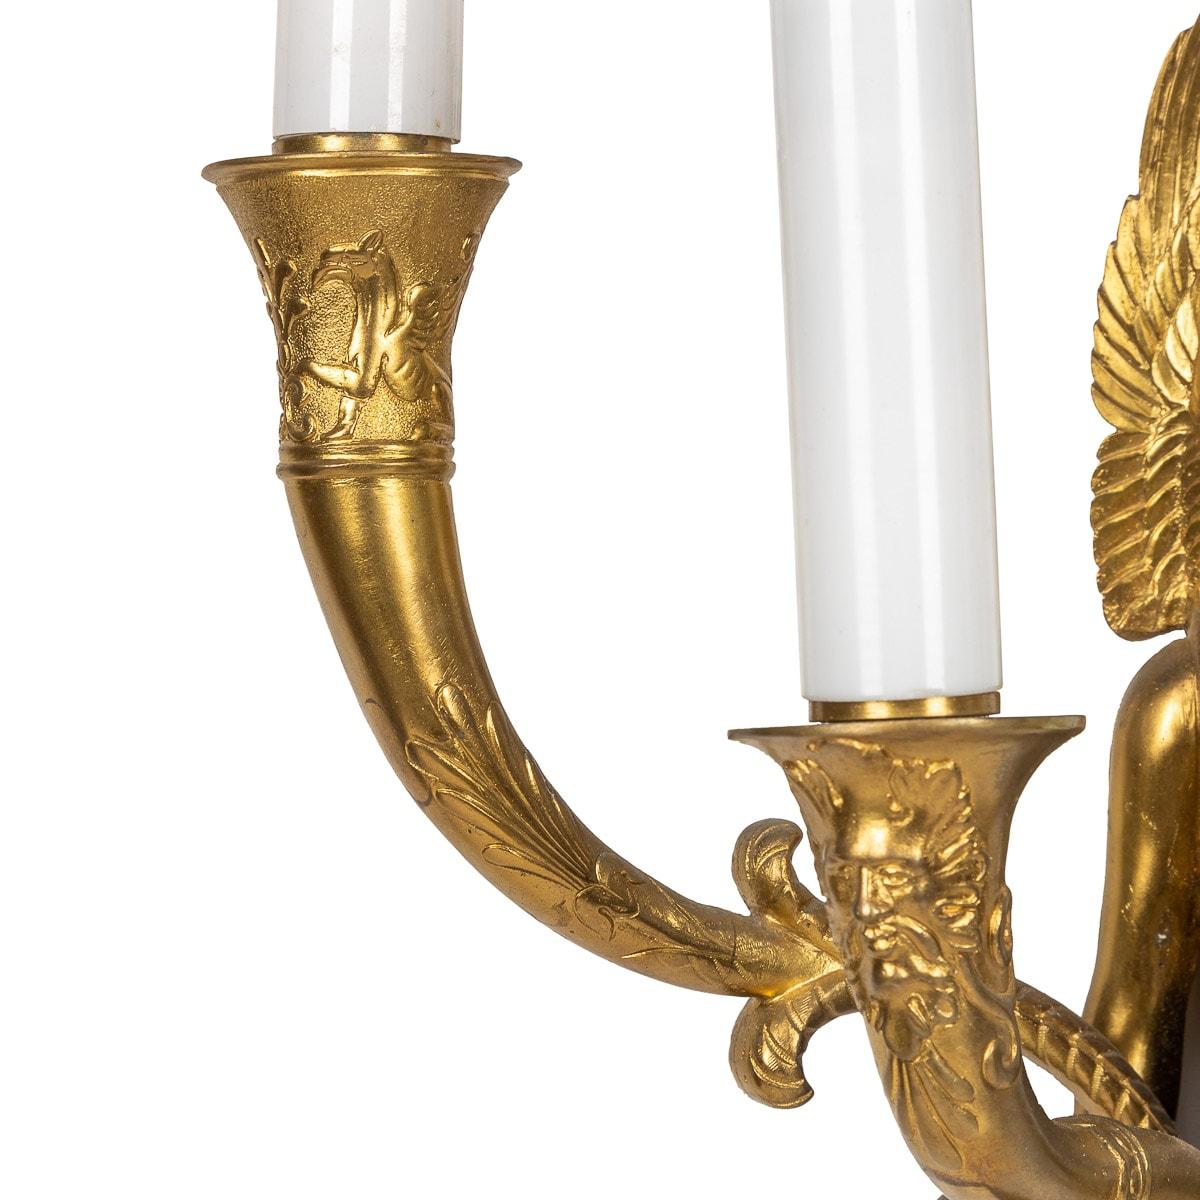 19th Century French Egyptian Revival Part Ormolu D'appliques Wall Lights, c 1830 For Sale 3